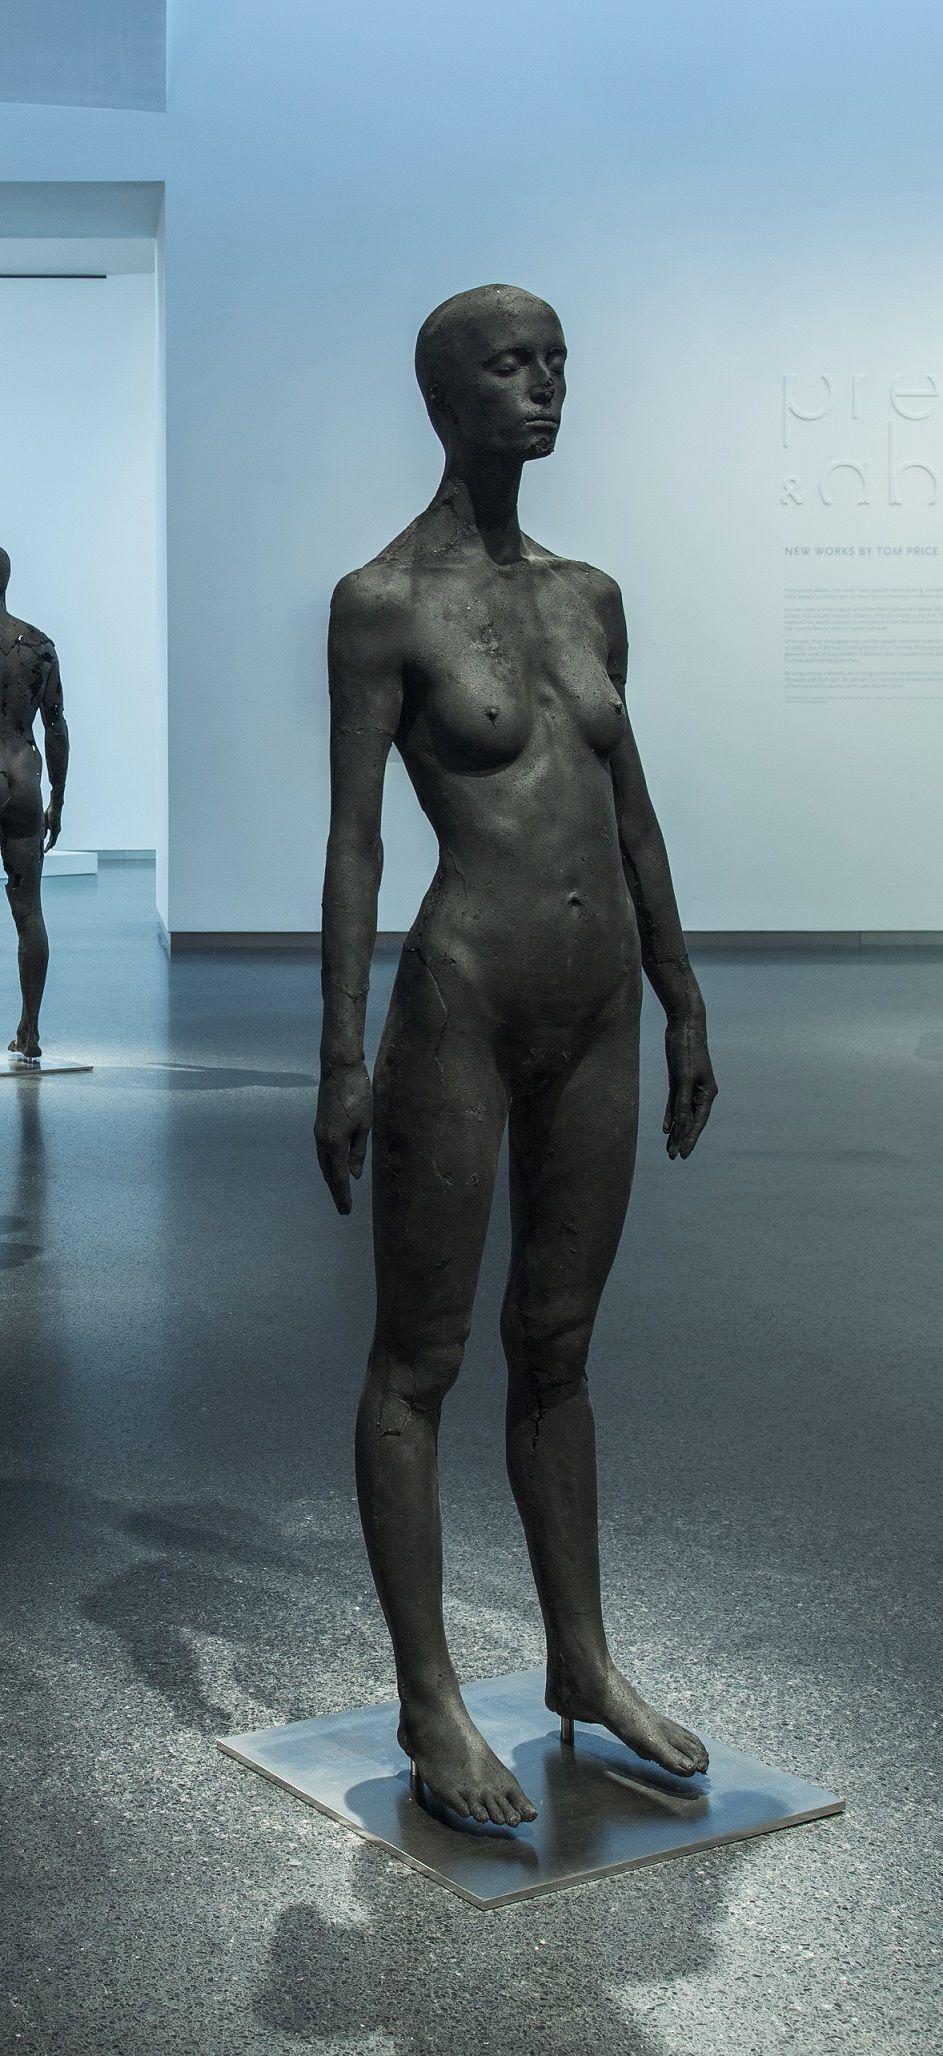 The Presence of Absence - Female (I) by Tom Price - Sculpture en charbon, corps nu